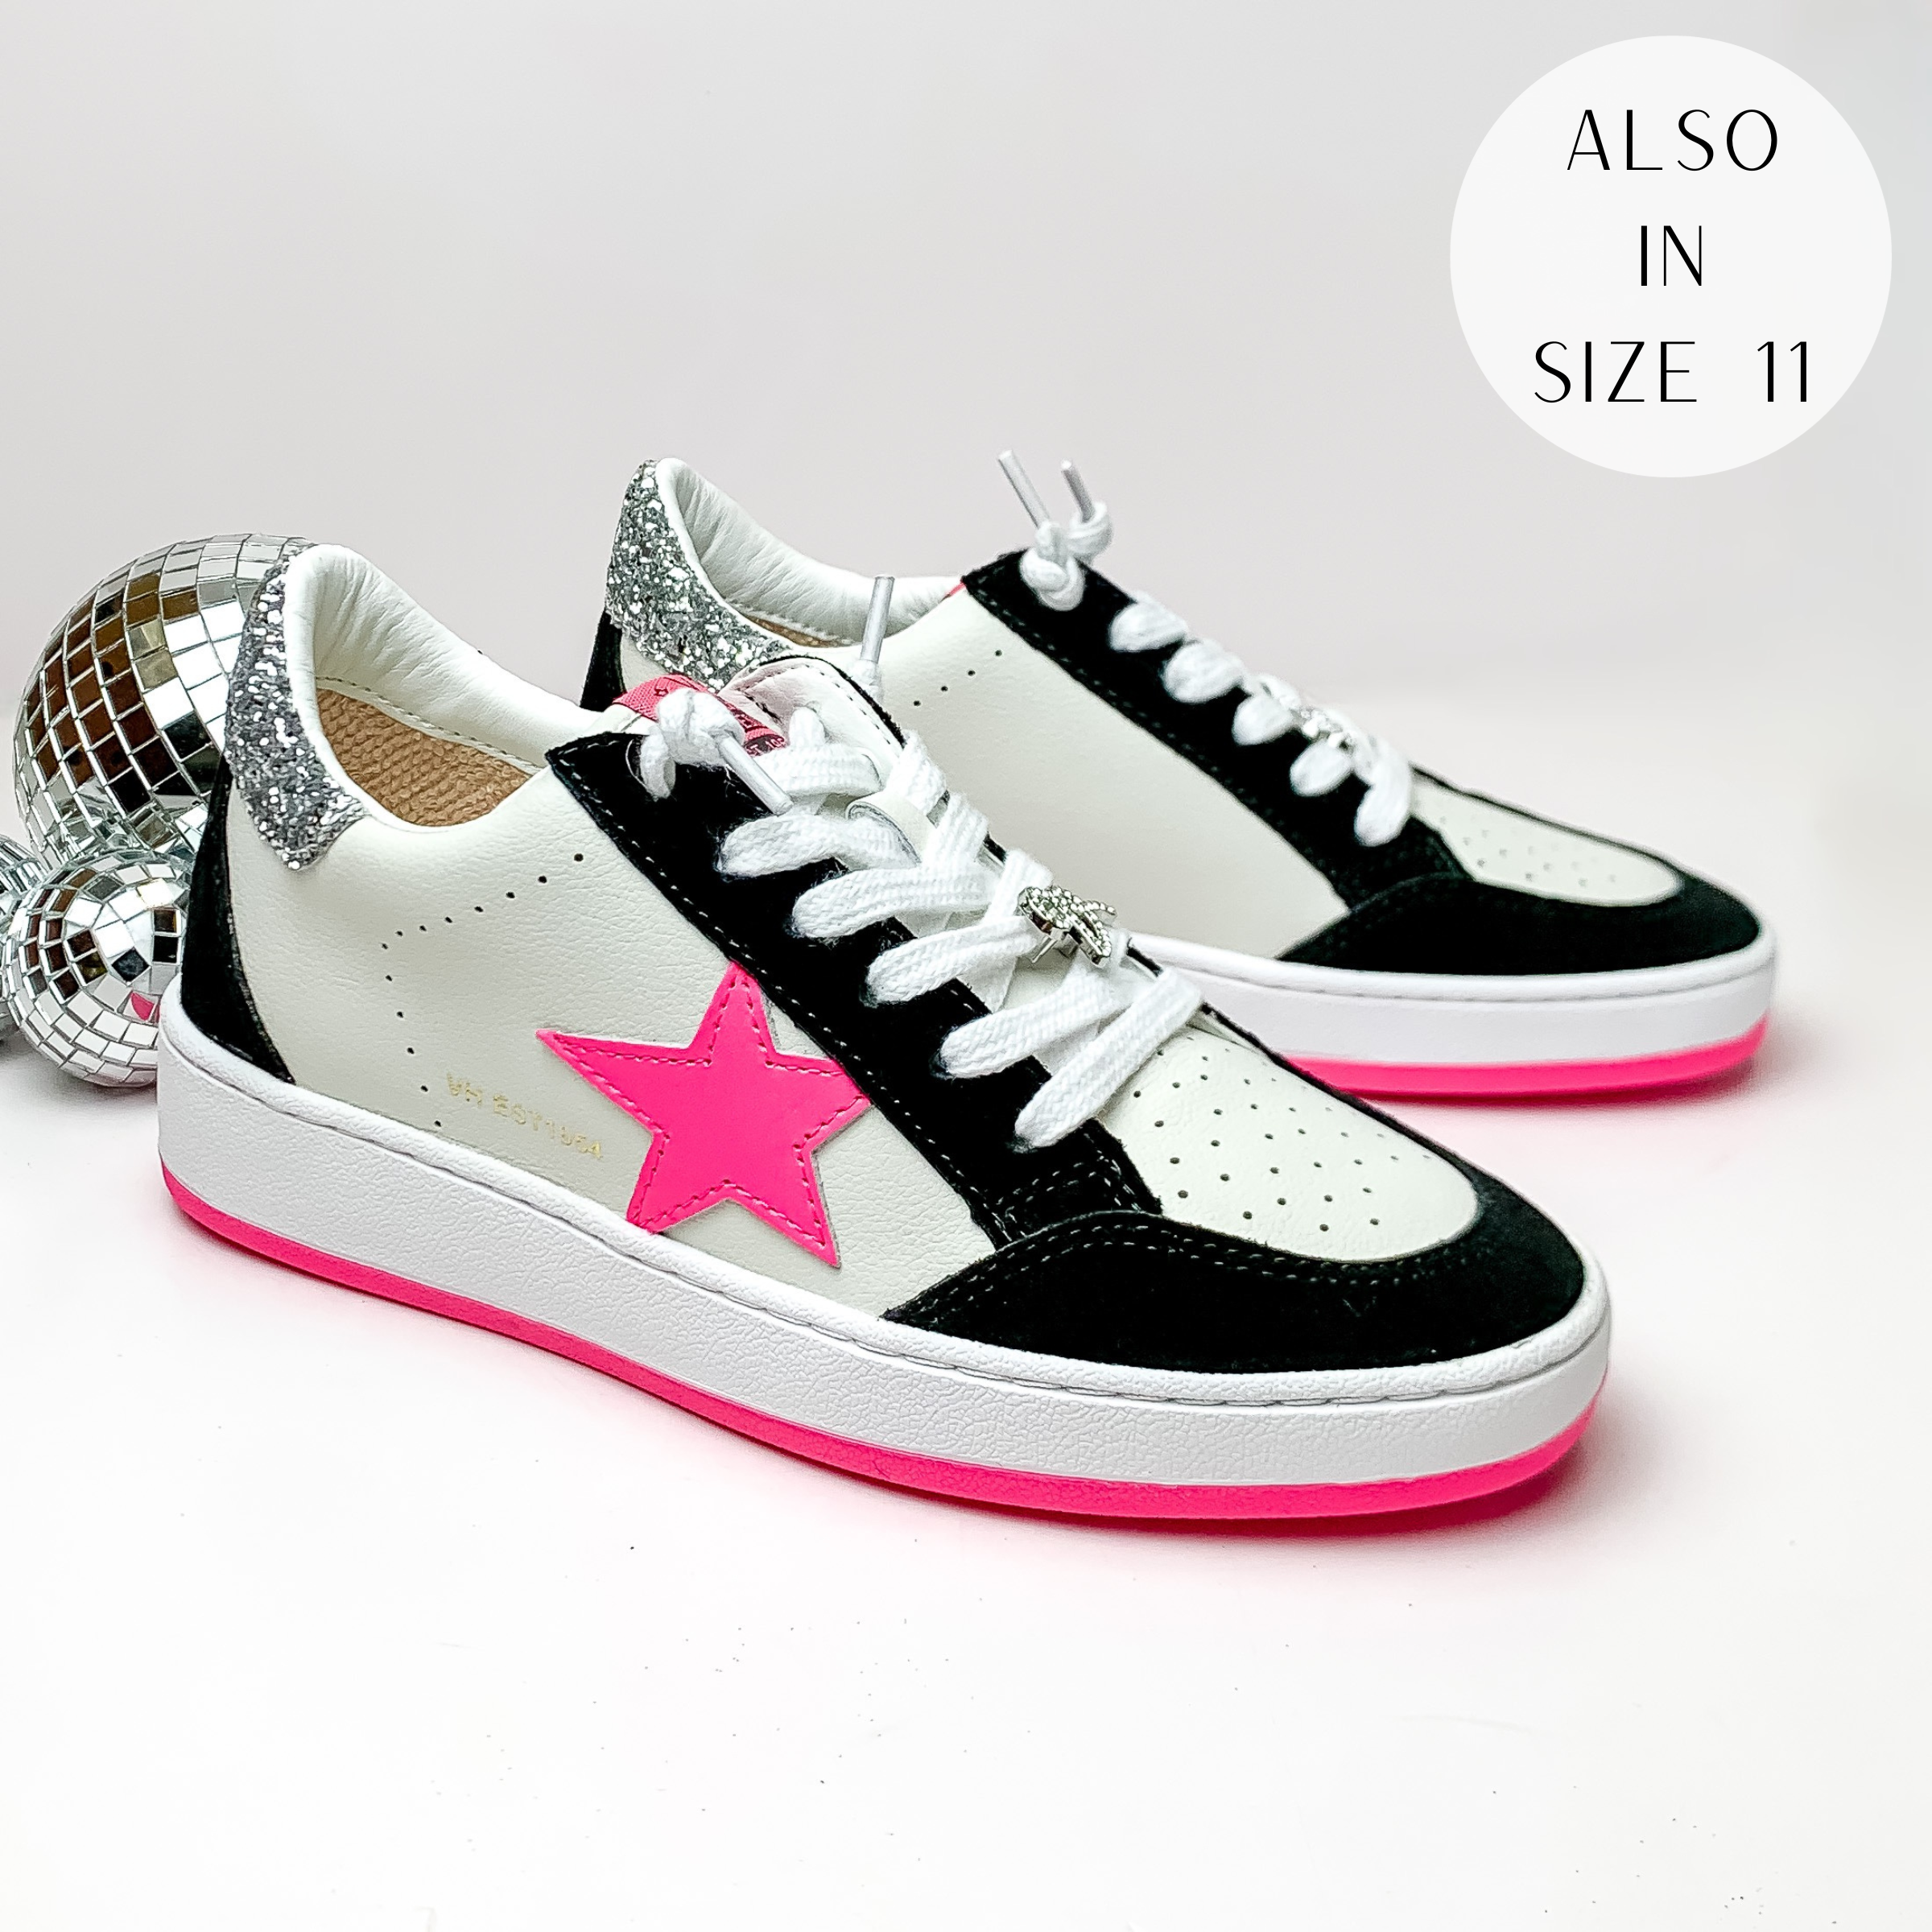 Pictured is a pair of white tennis shoes with black, silver glitter, and hot pik detailing. These shoes include a sliver glitter heel, a hot pink star on the side, and white laces. These shoes are pictured on a white background with disco balls on the left side